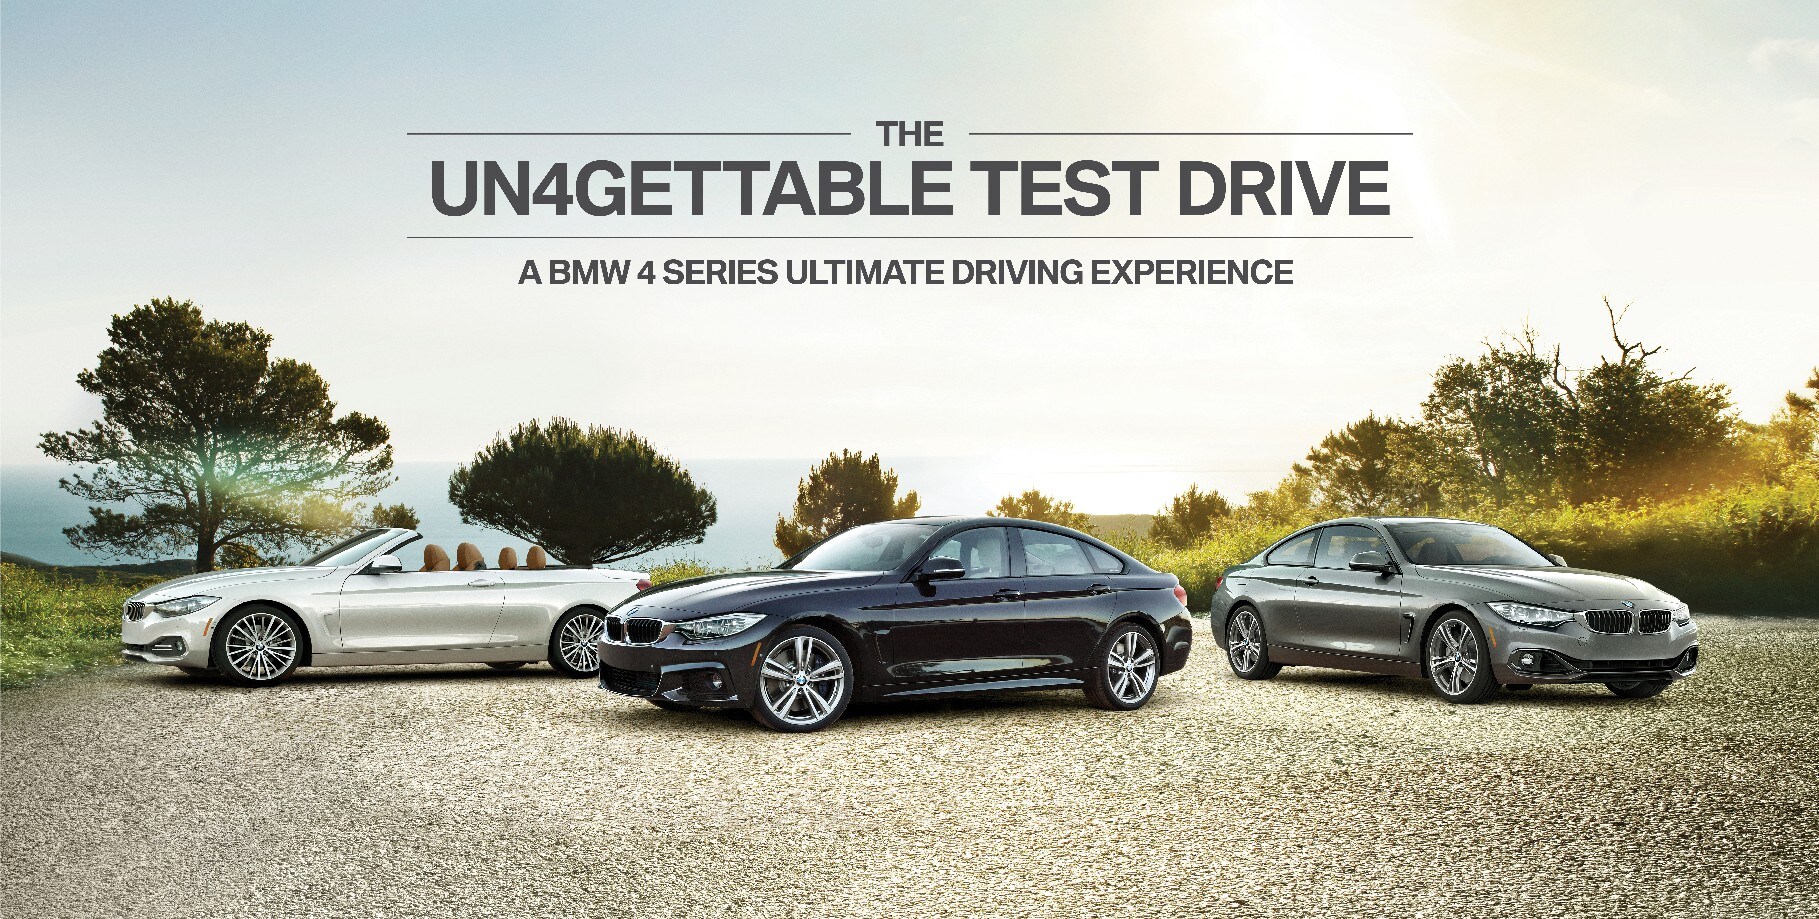 Bmw the ultimate driving experience #2